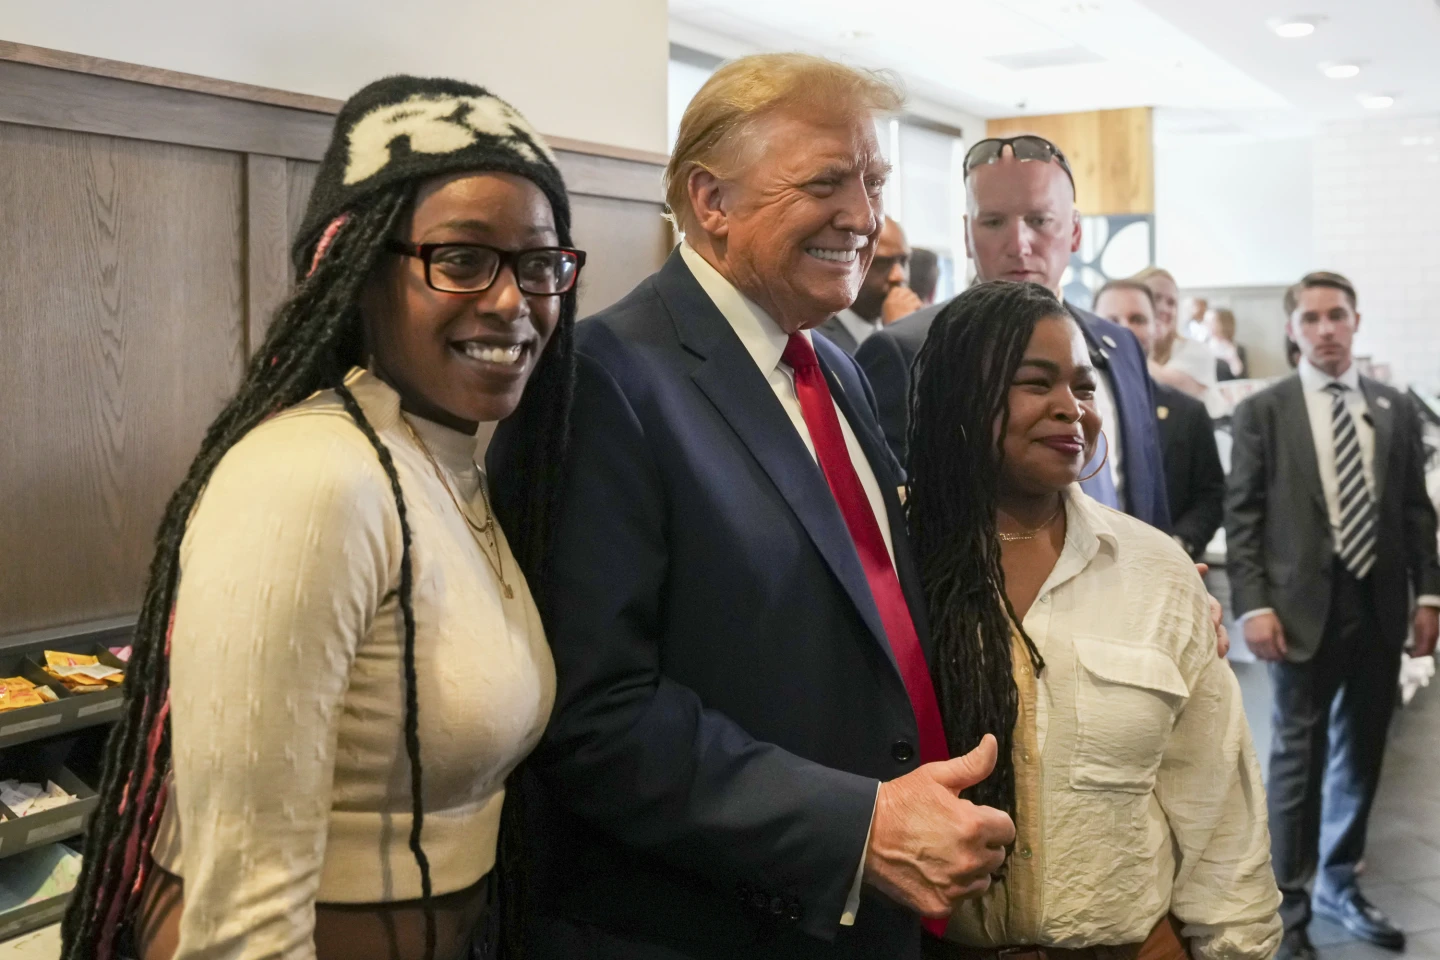 Trump suddenly seems to love Black voters for some reason — but it’s def not mutual: A recent poll found only a 25 percent favorability rating for the disgraced ex-president among Black Americans 🚨